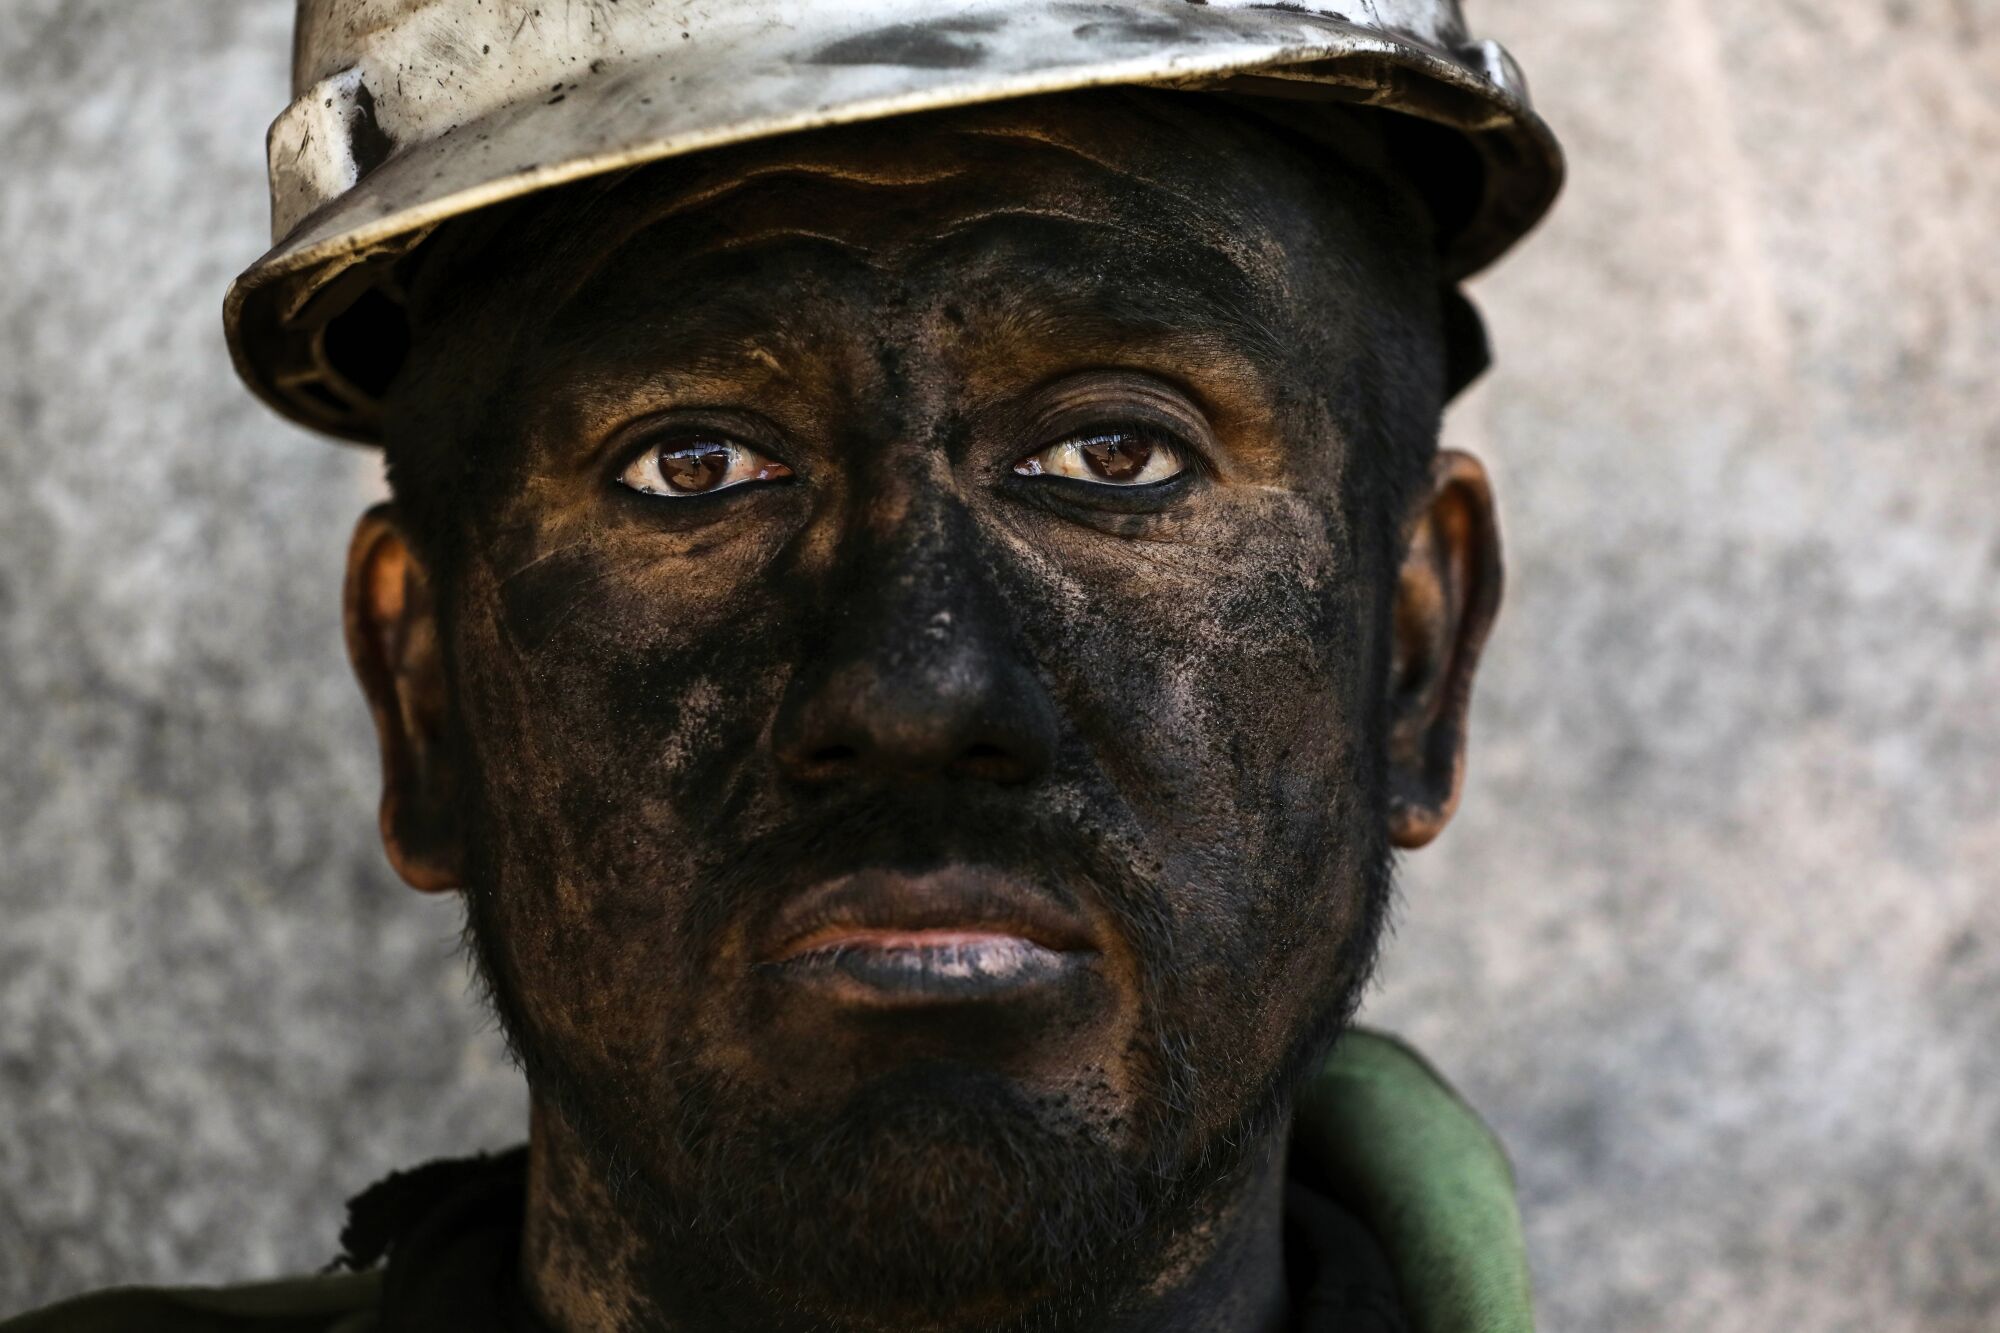 A man's face covered in black coal dust and dirt 